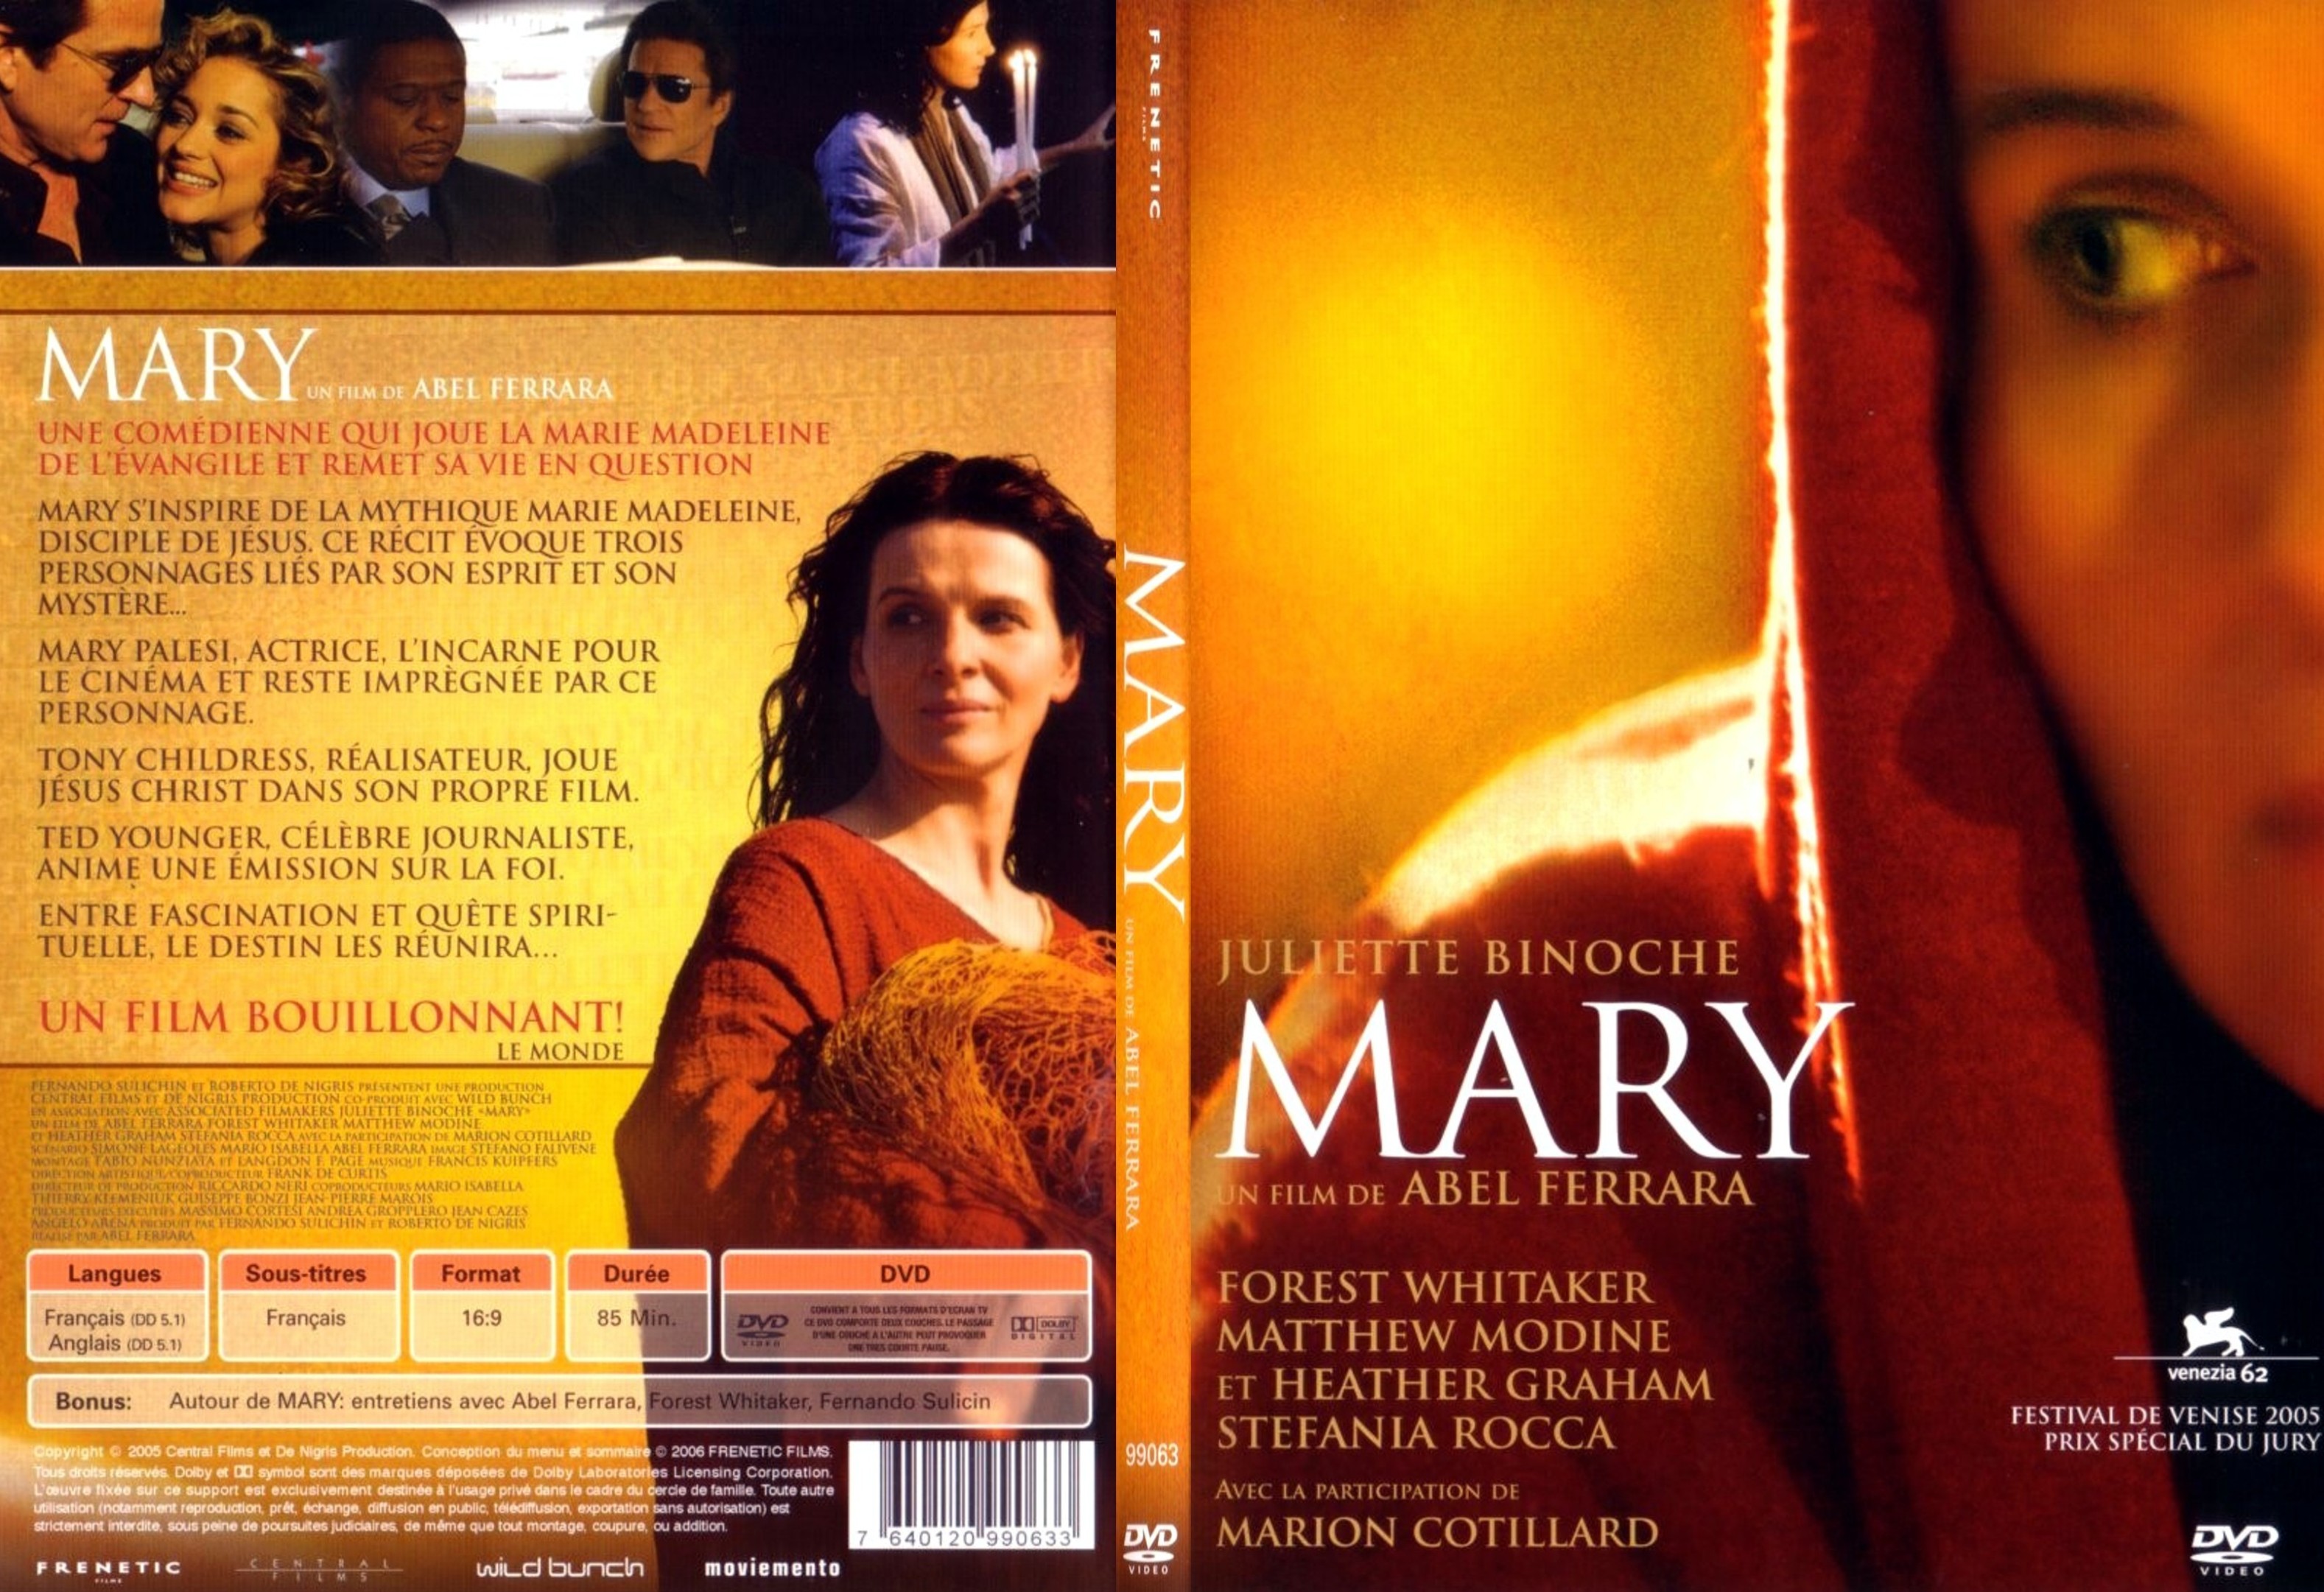 Jaquette DVD Mary - SLIM